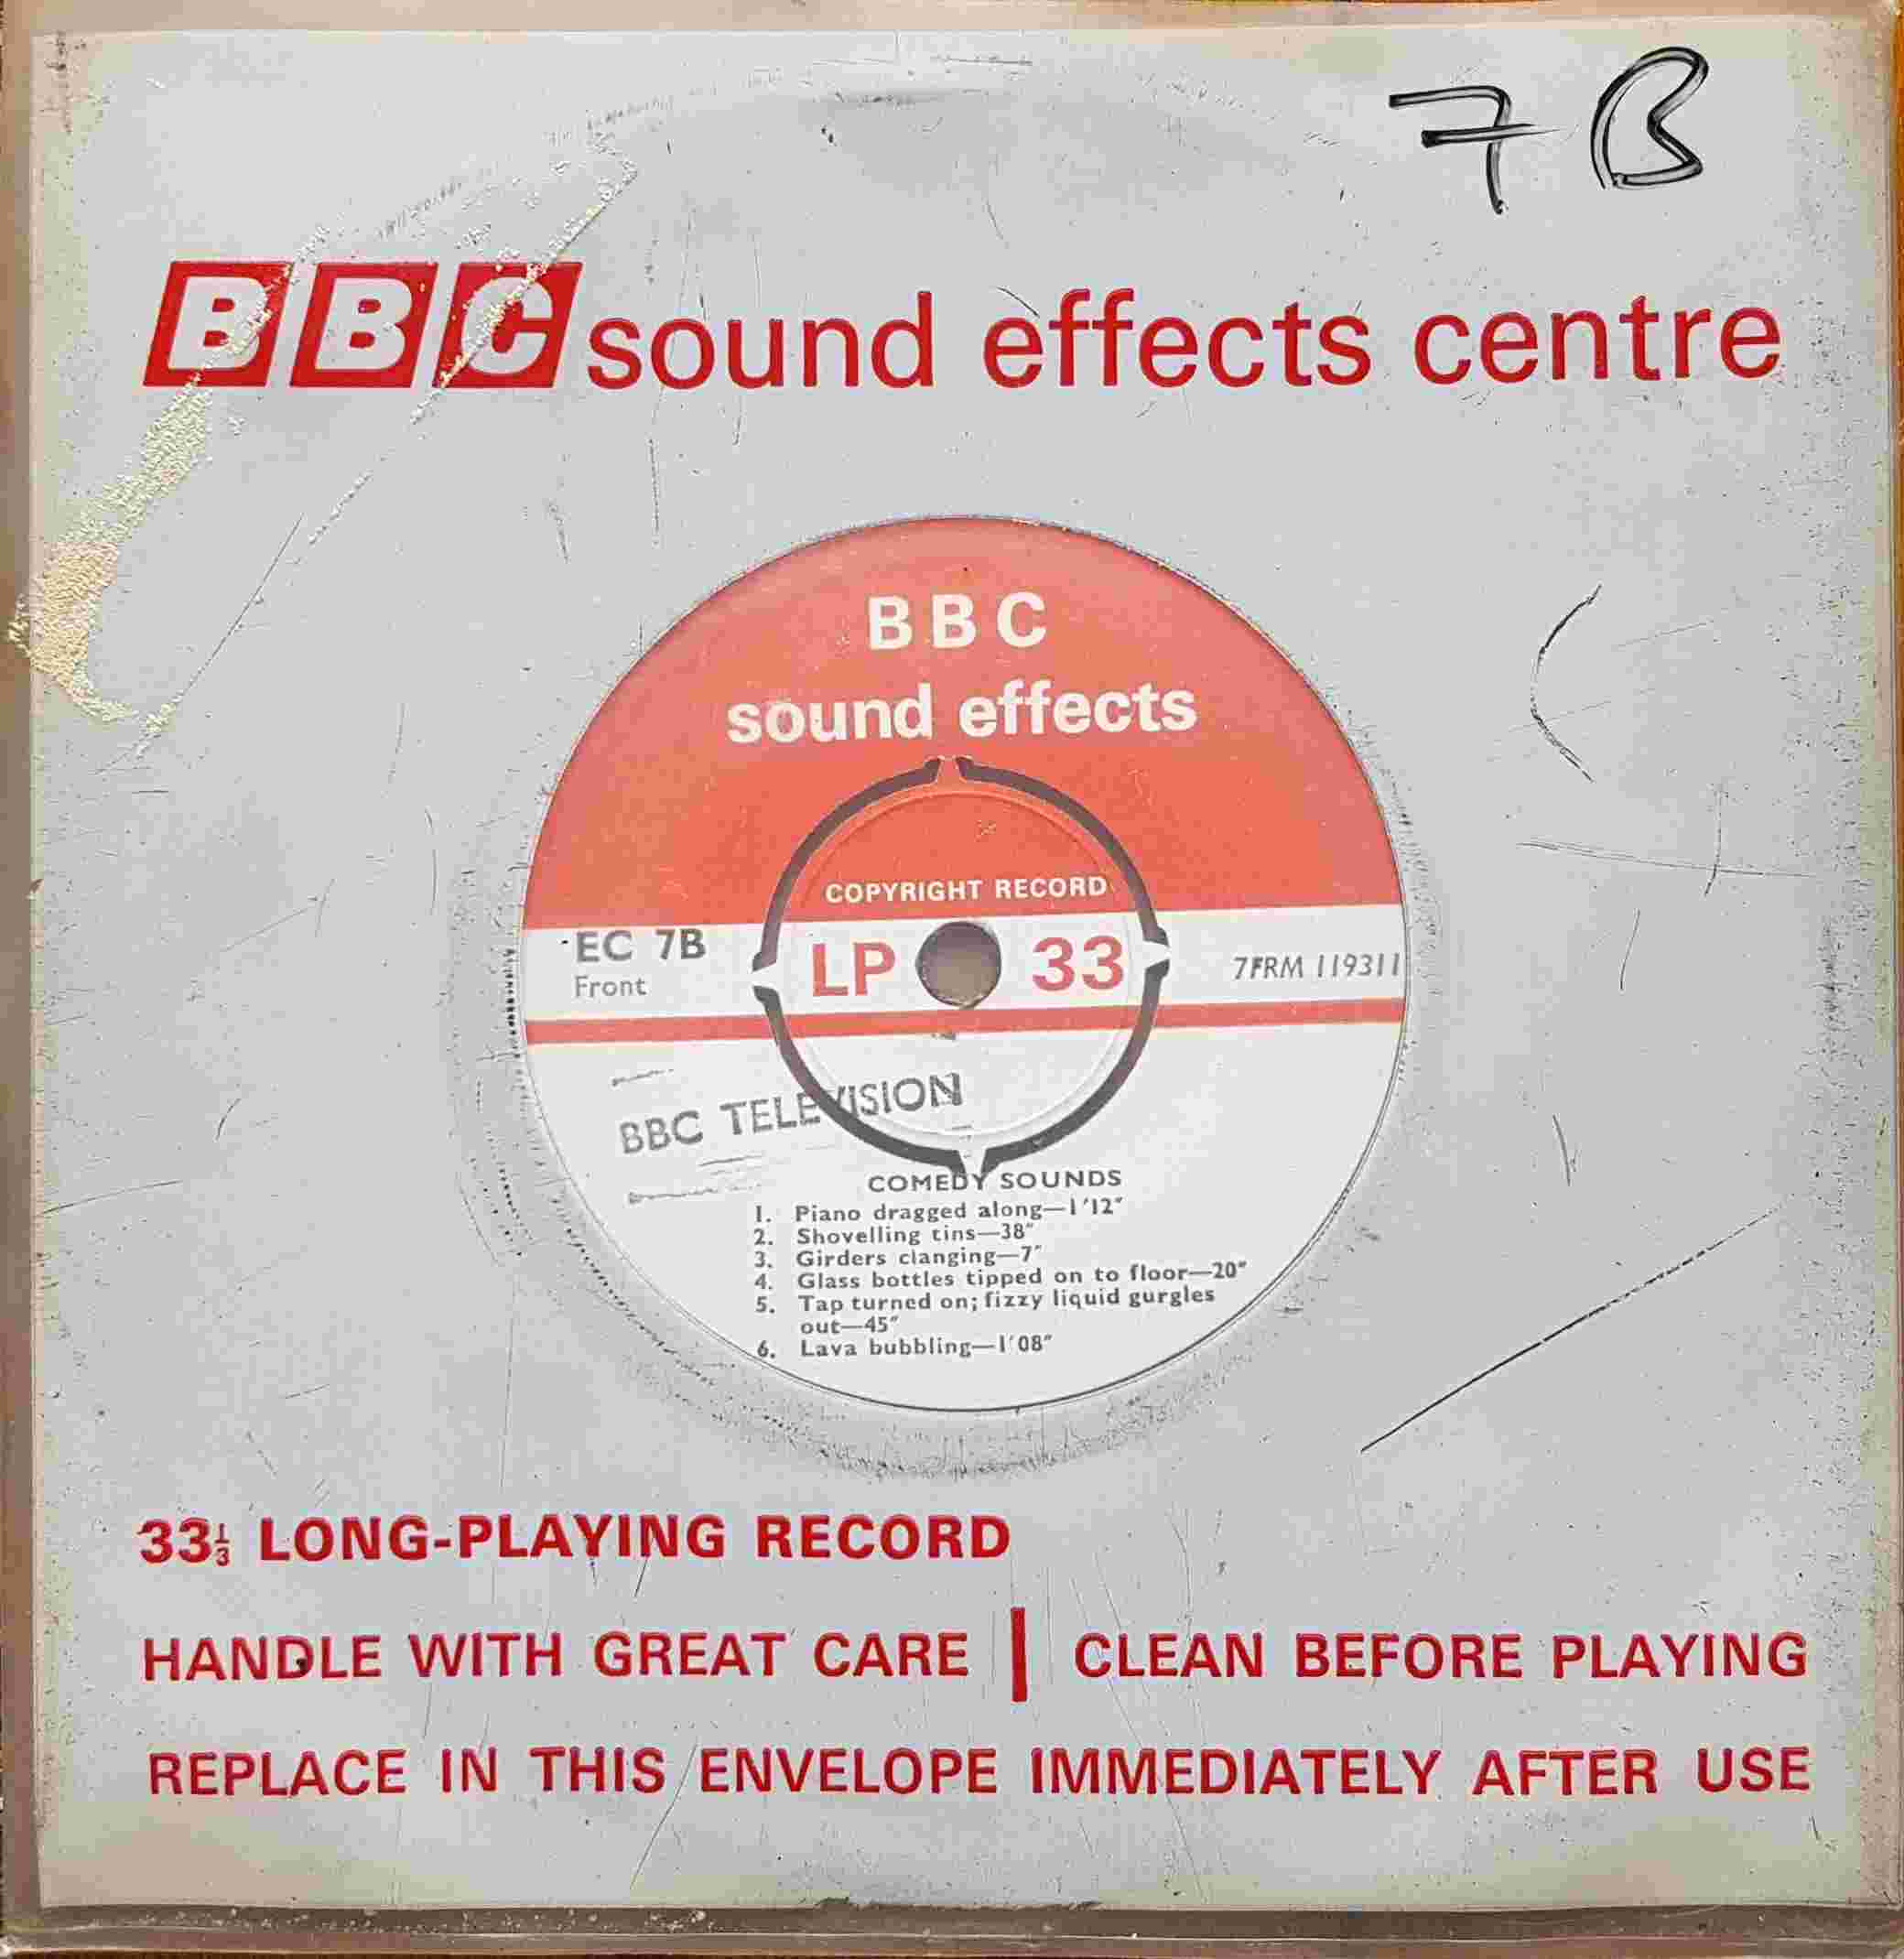 Picture of EC 7B Comedy sounds by artist Not registered from the BBC records and Tapes library